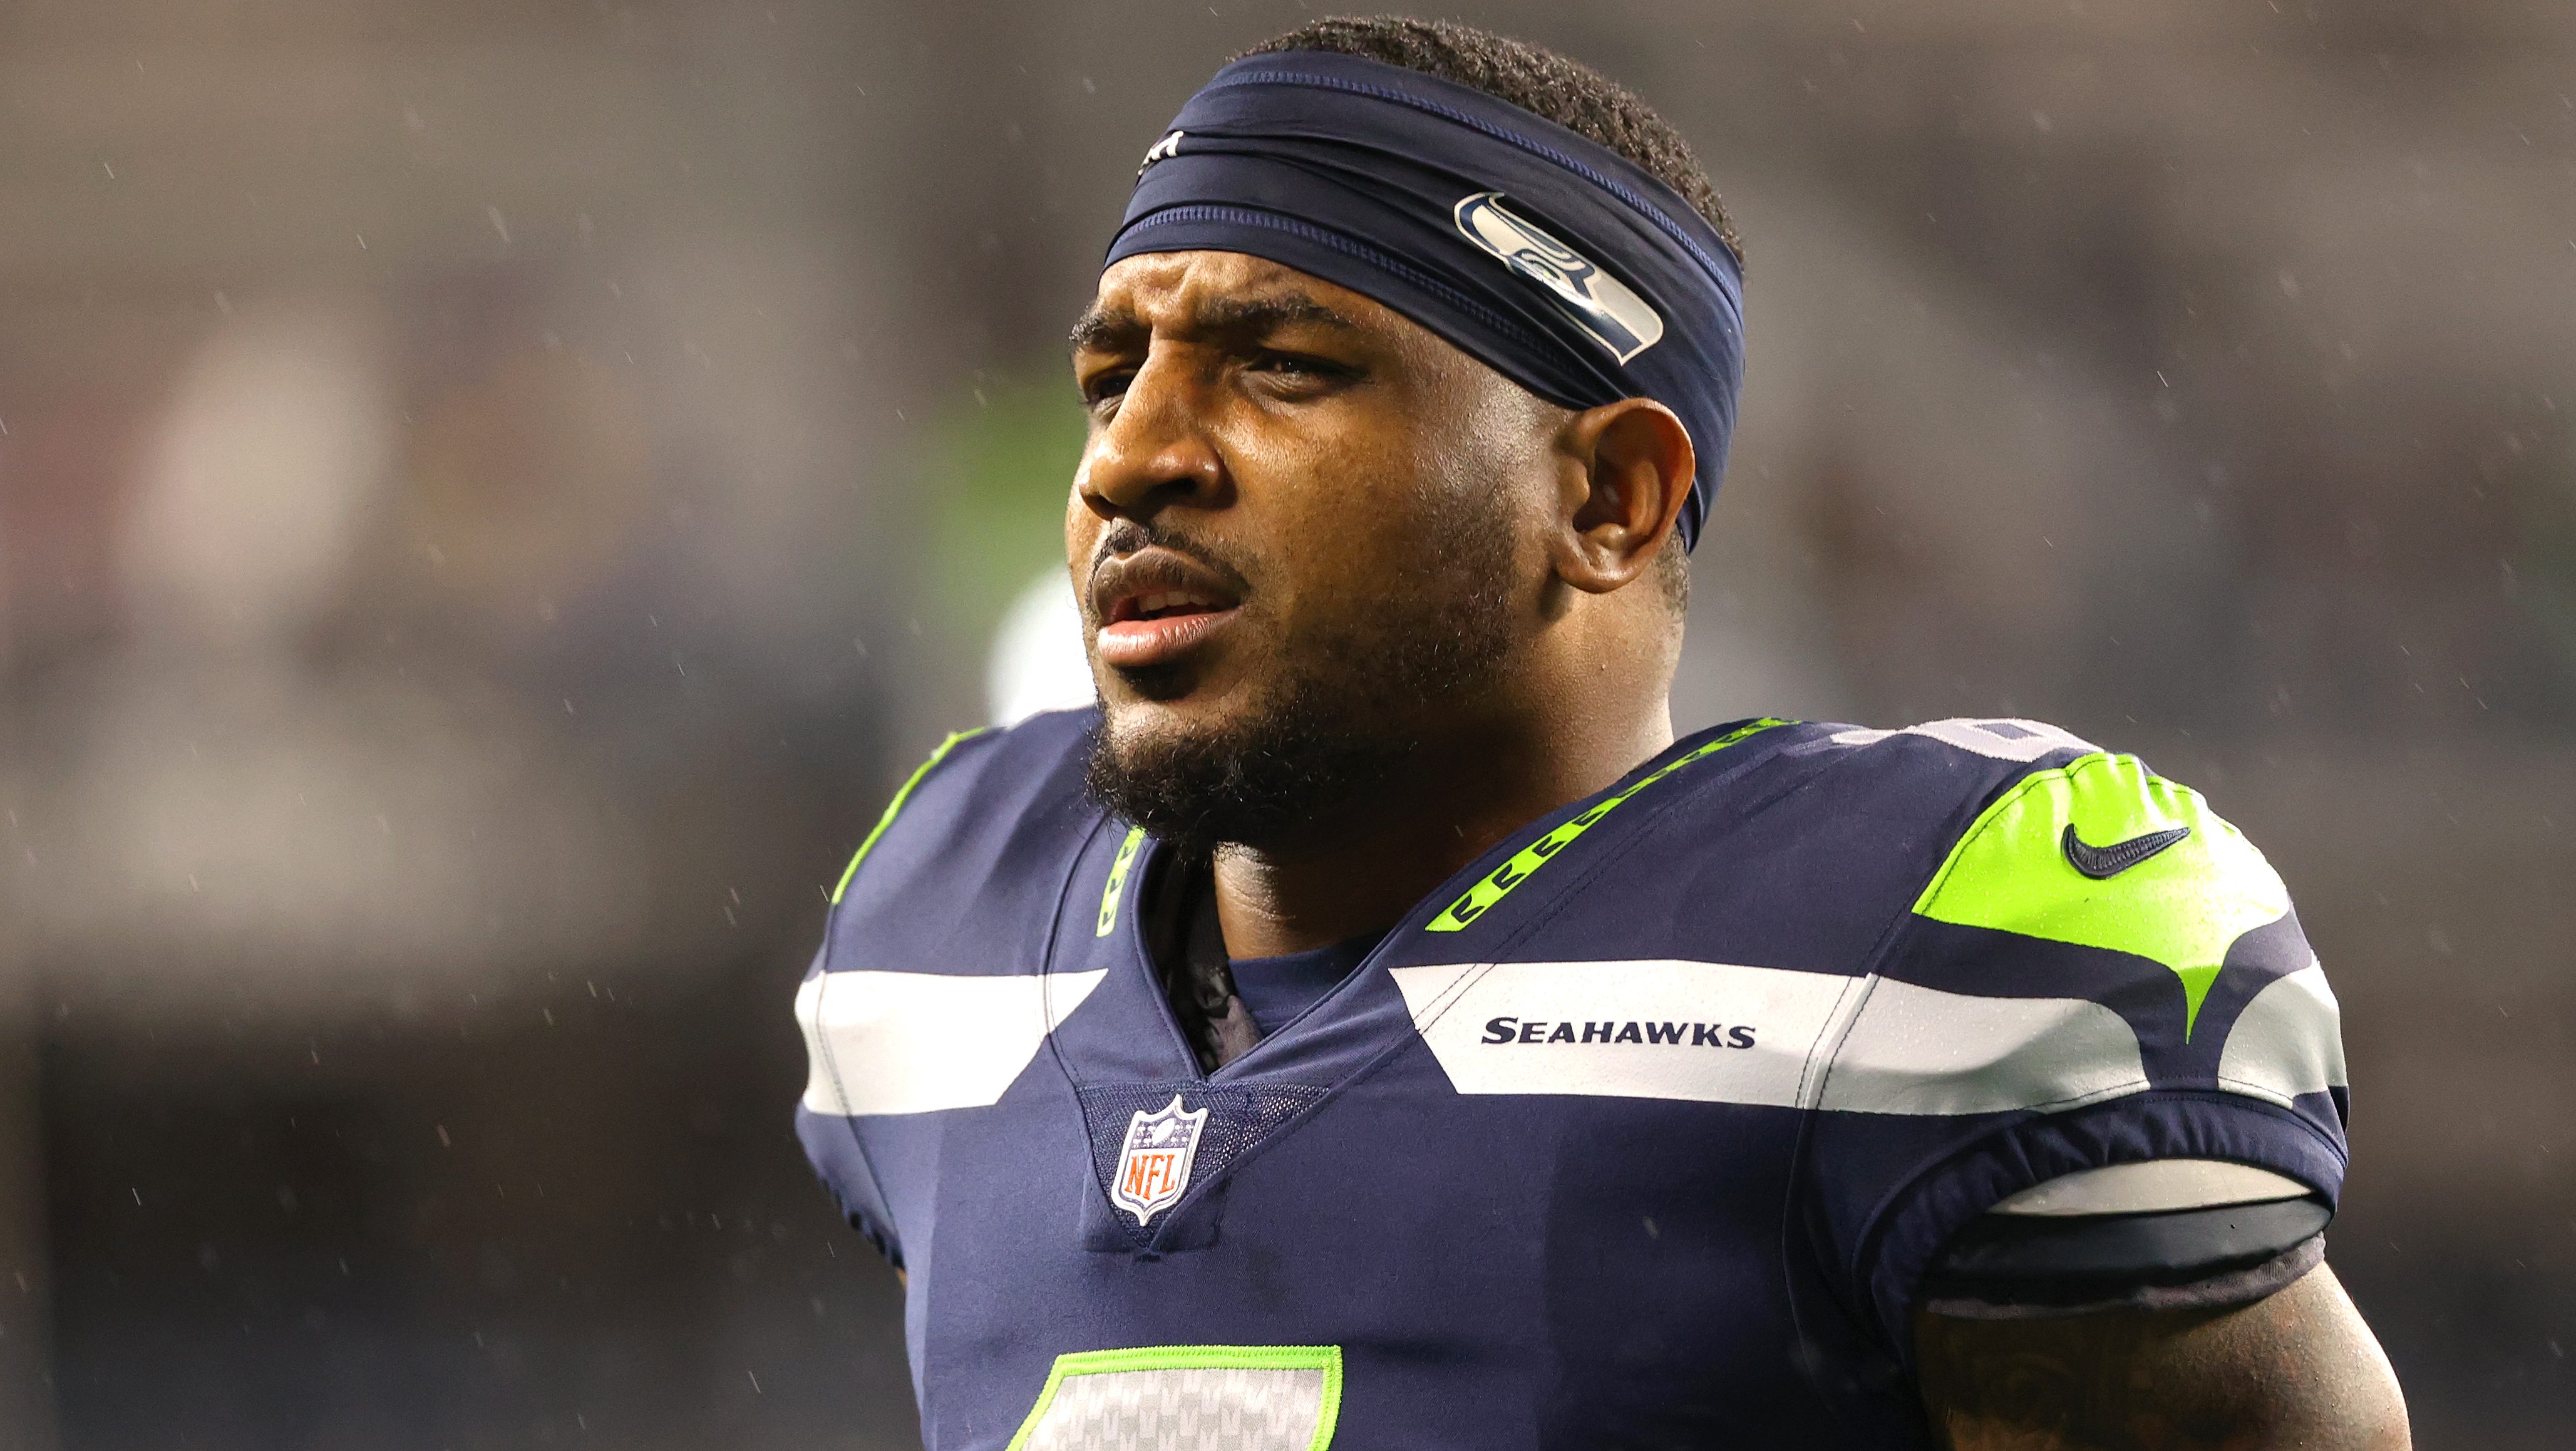 Seahawks' $30 Million Star Considered Cut Candidate: Analyst